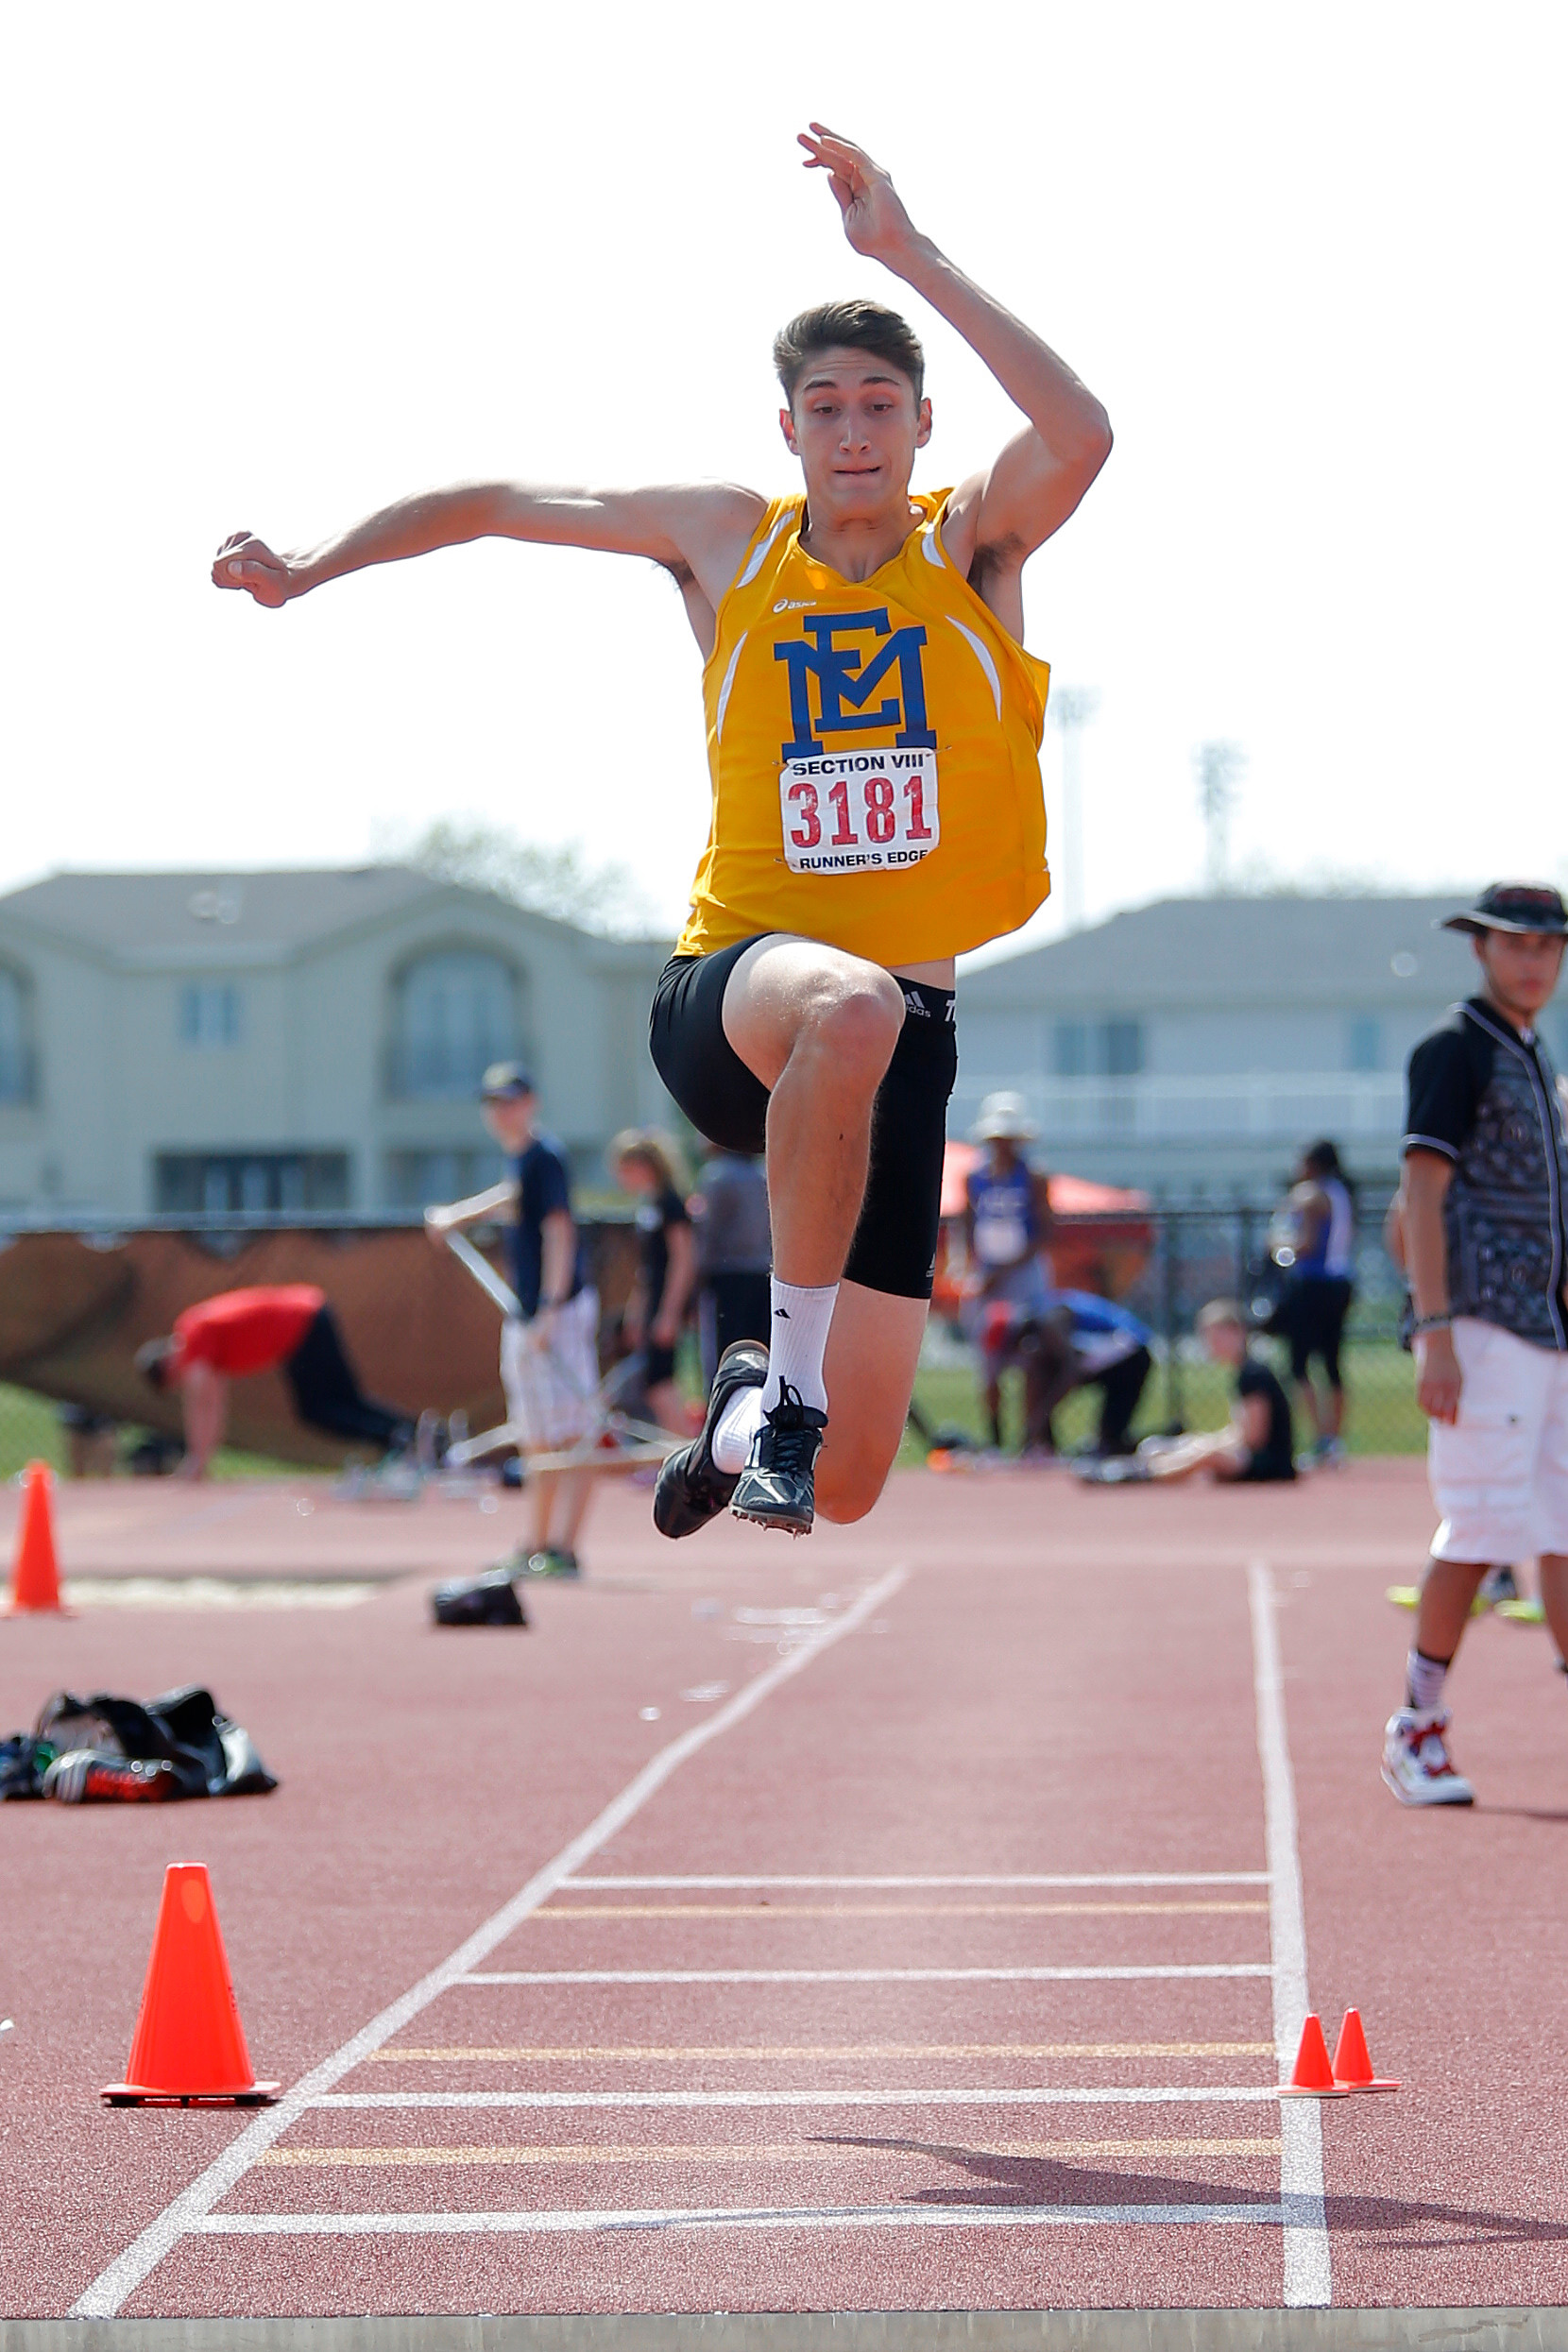 Senior Nick O’Malley helped lead the Jets to an undefeated regular season and qualified for the state meet in the high jump.